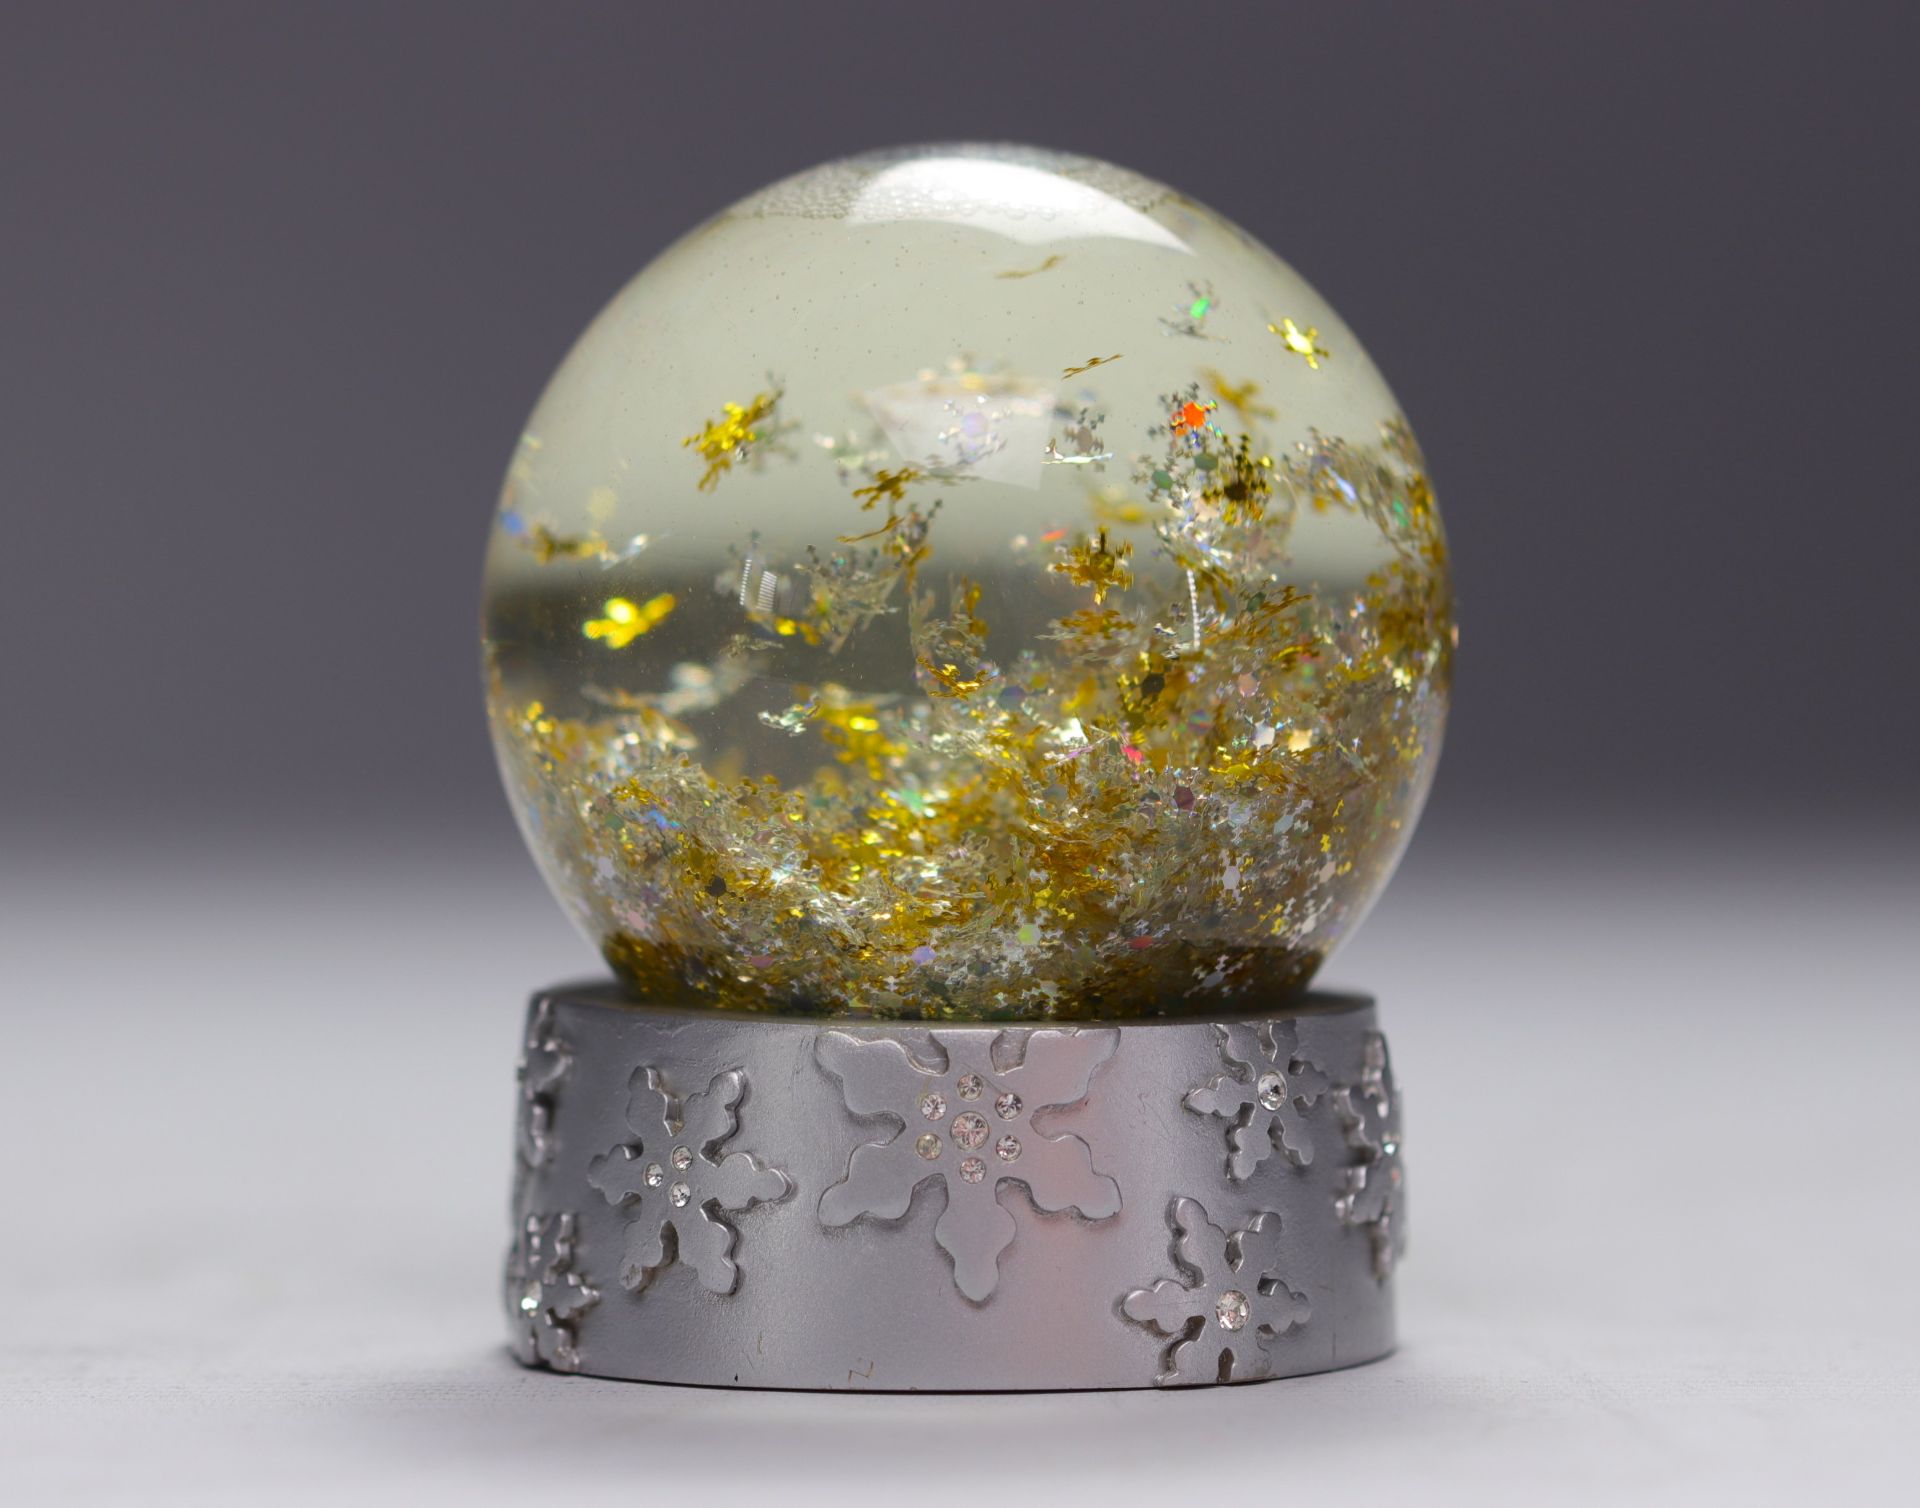 Swarovski. Snow globe with gold and silver sequins. Base adorned with Swarovsk crystals. - Image 2 of 2